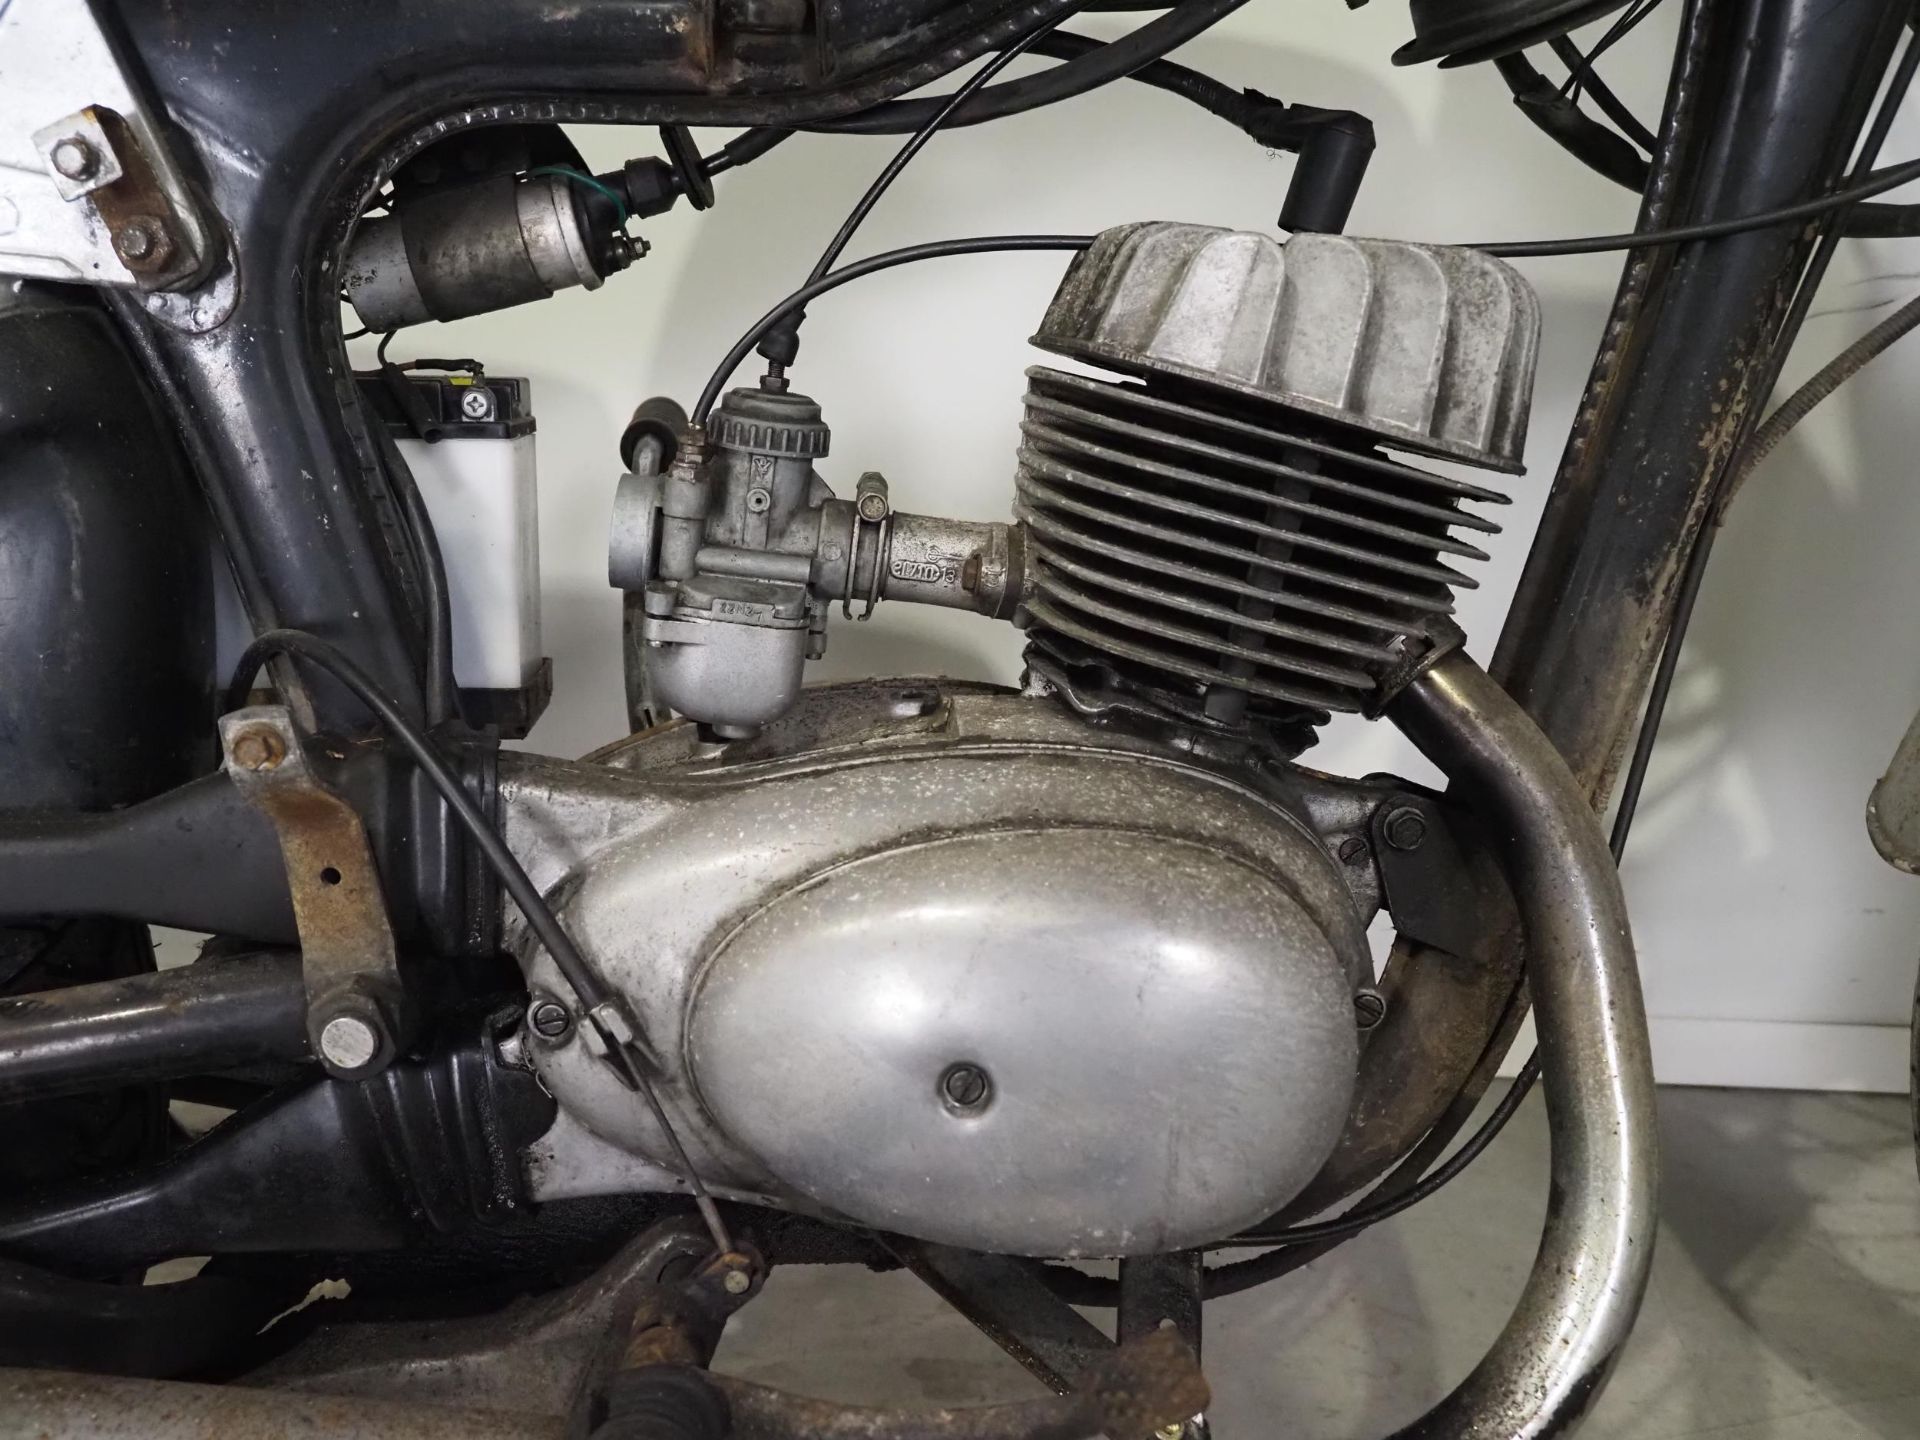 MZ motorcycle. 1986. 125cc. Frame No. 8861678 as stated on V5 Engine No. 7504877 Property of a - Image 4 of 6